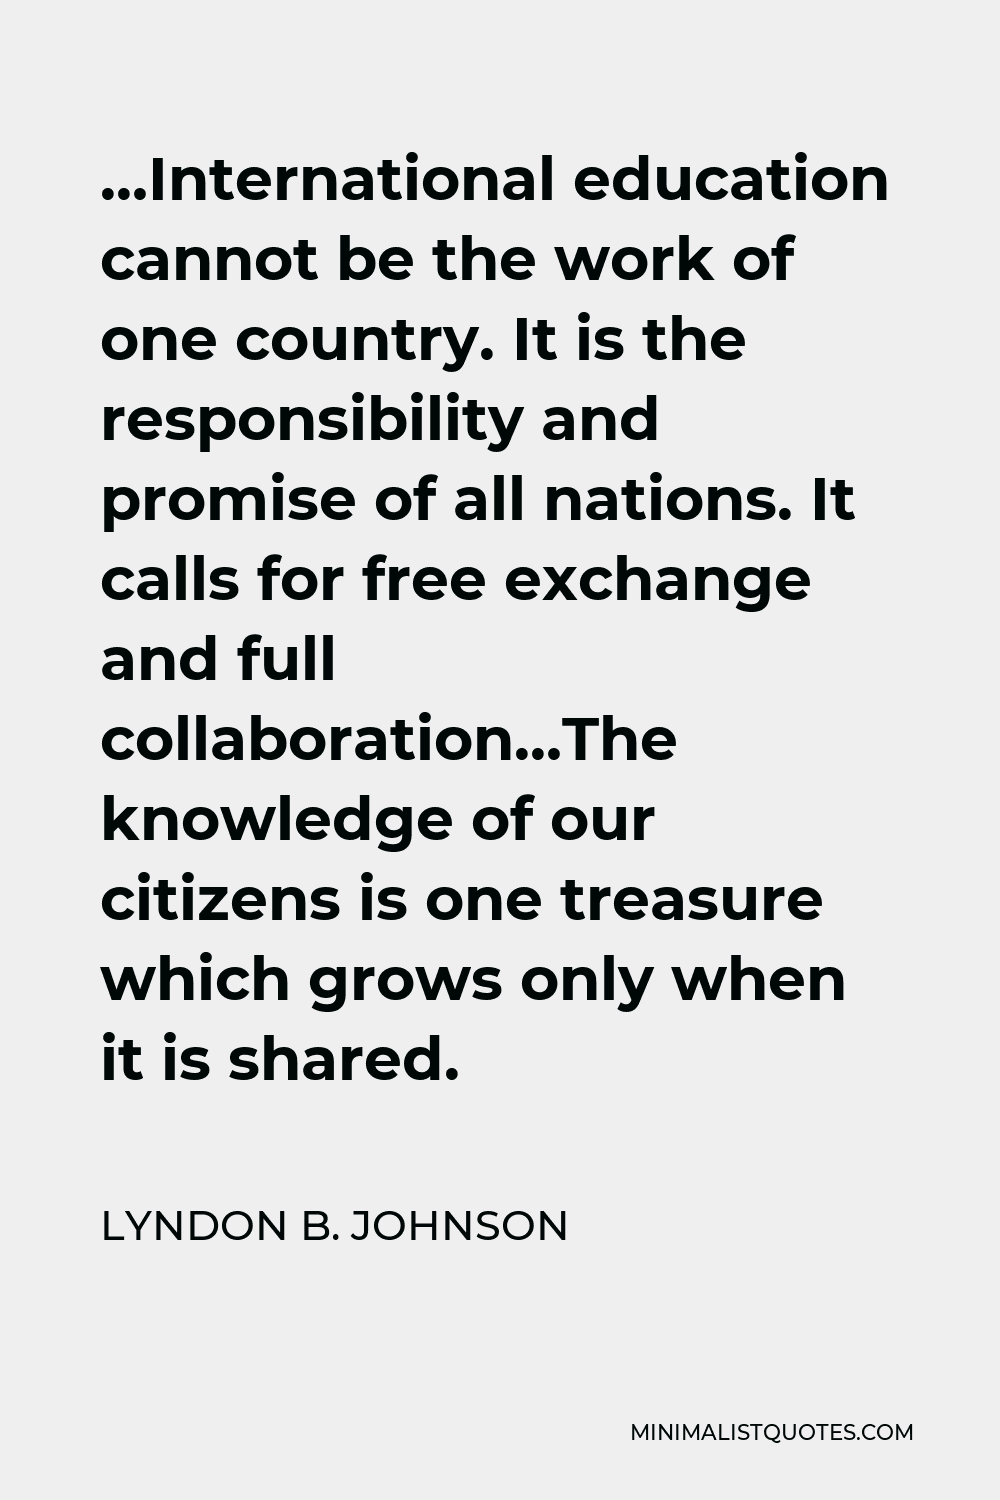 Lyndon B. Johnson Quote - …International education cannot be the work of one country. It is the responsibility and promise of all nations. It calls for free exchange and full collaboration…The knowledge of our citizens is one treasure which grows only when it is shared.